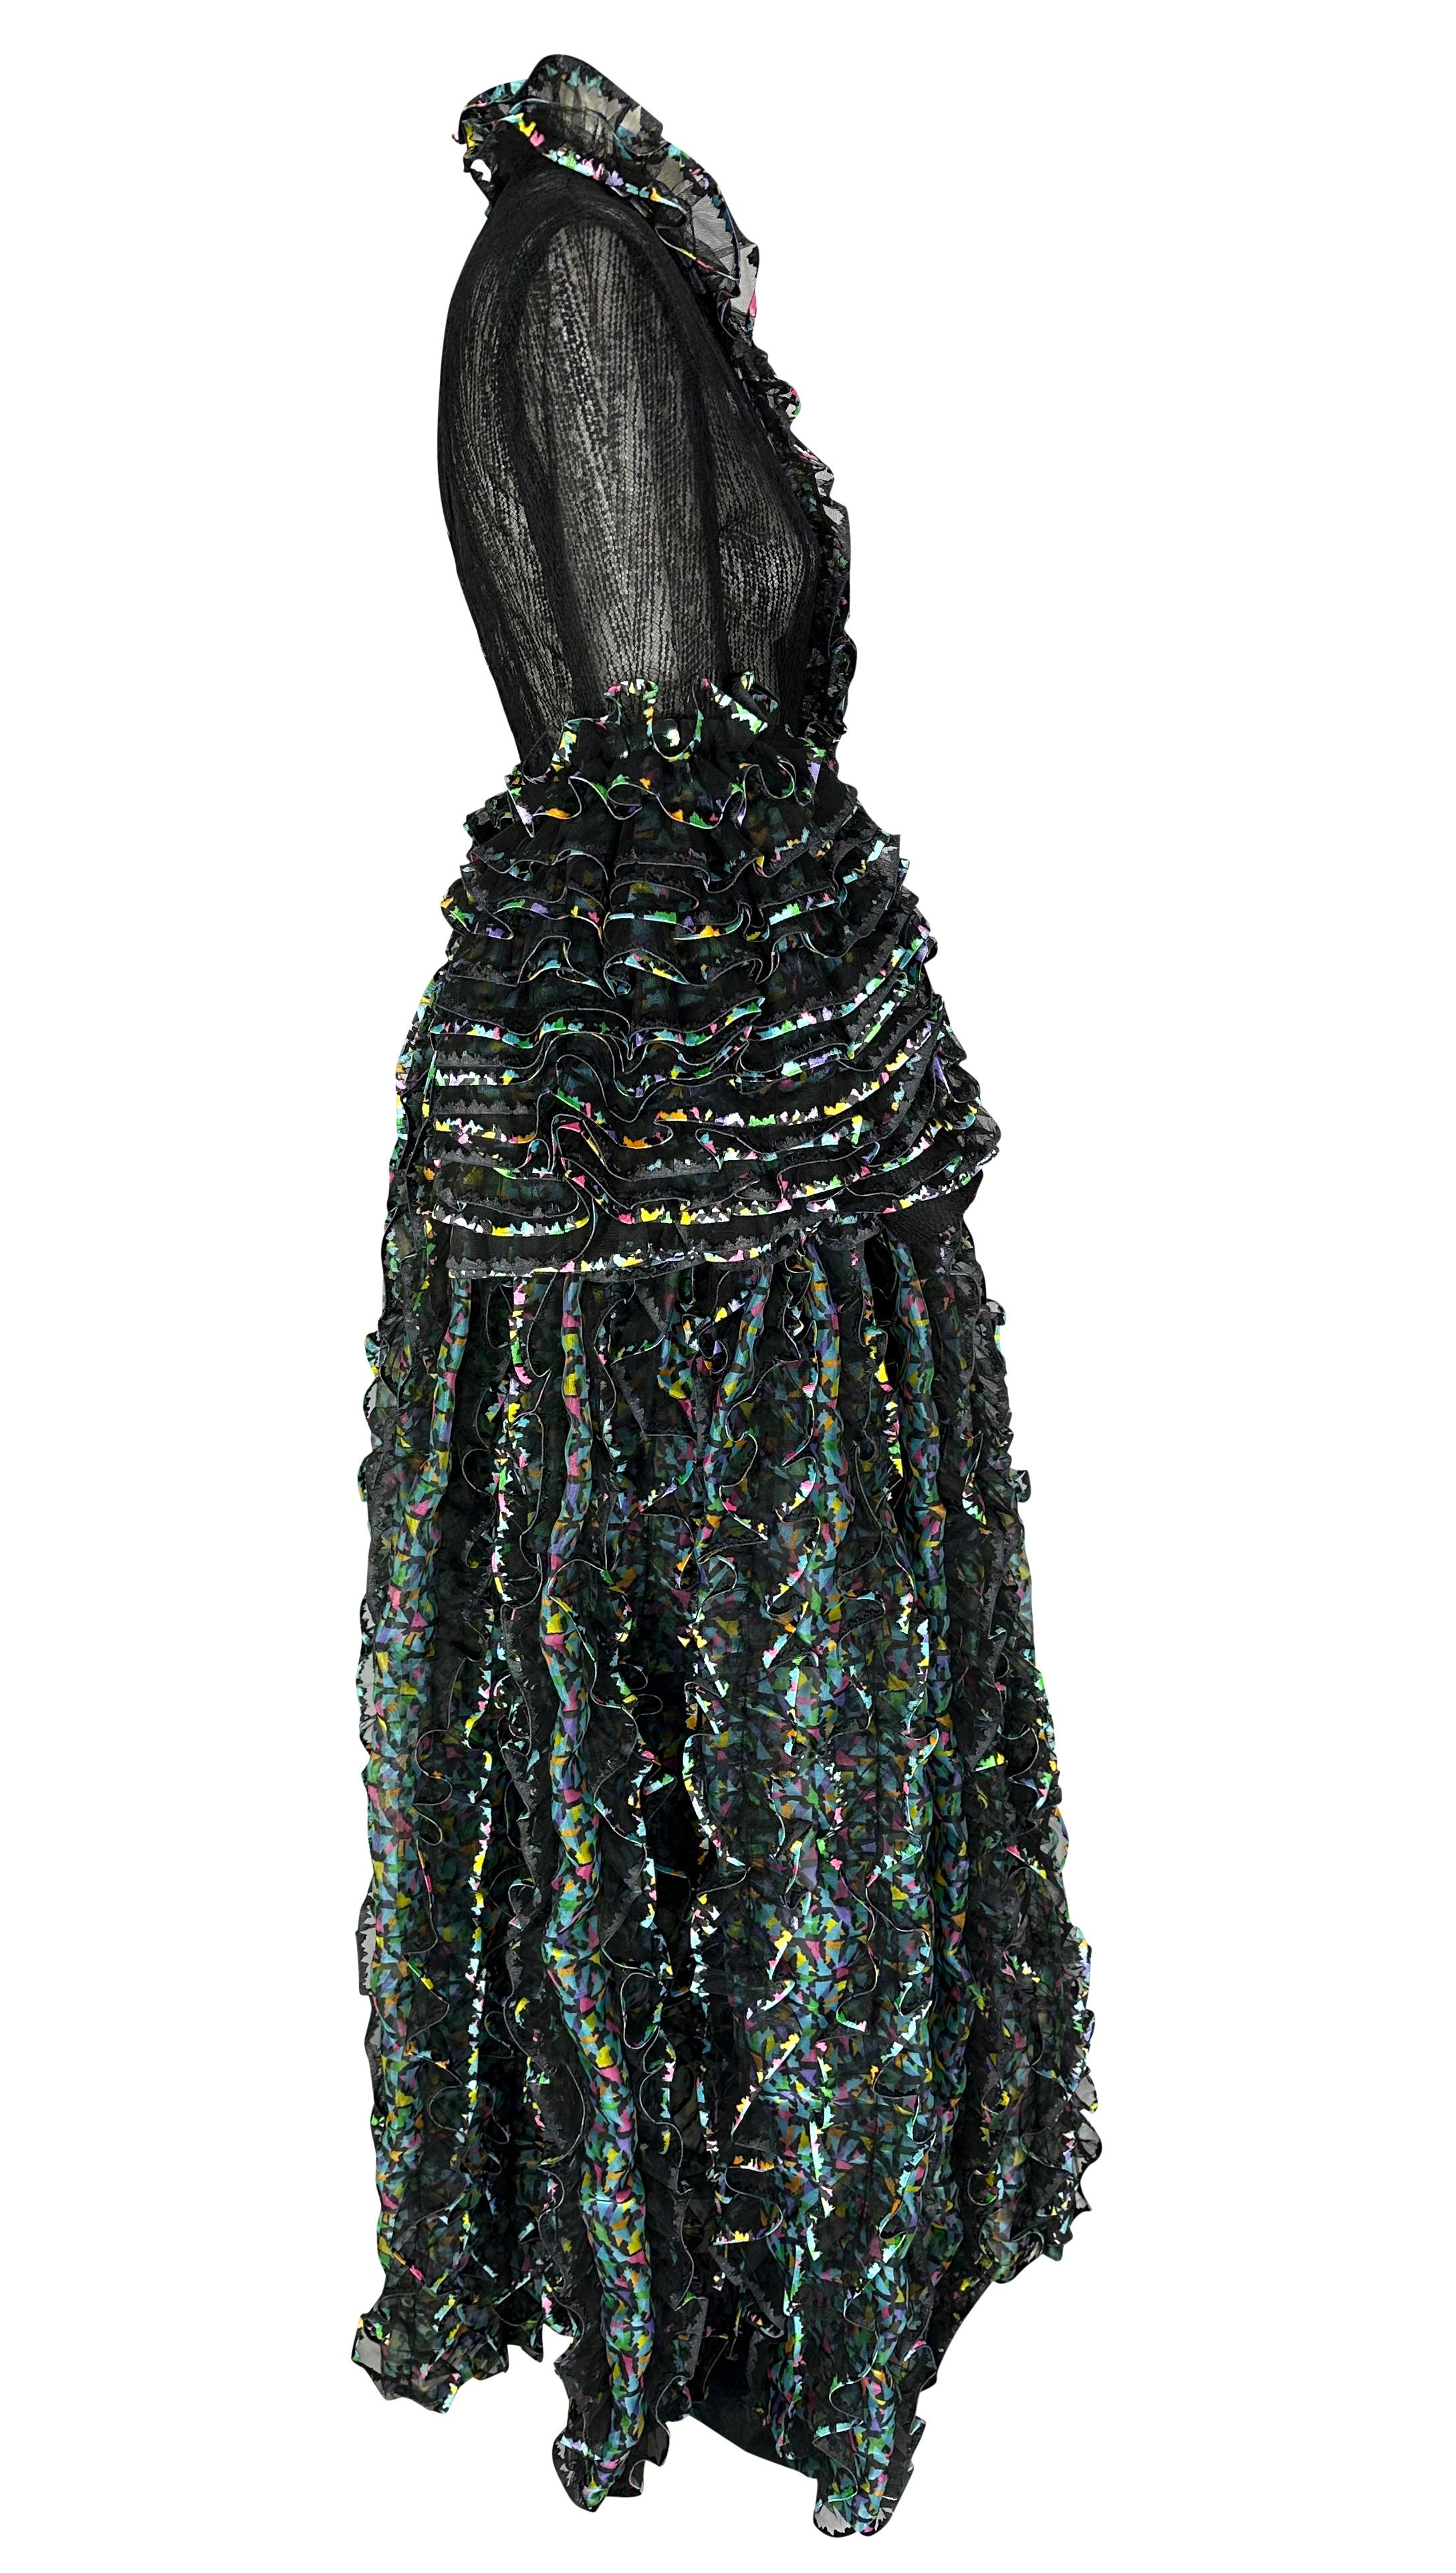 S/S 1987 Paco Rabanne Haute Couture Runway Sheer Embroidered Ruffle Gown For Sale 5